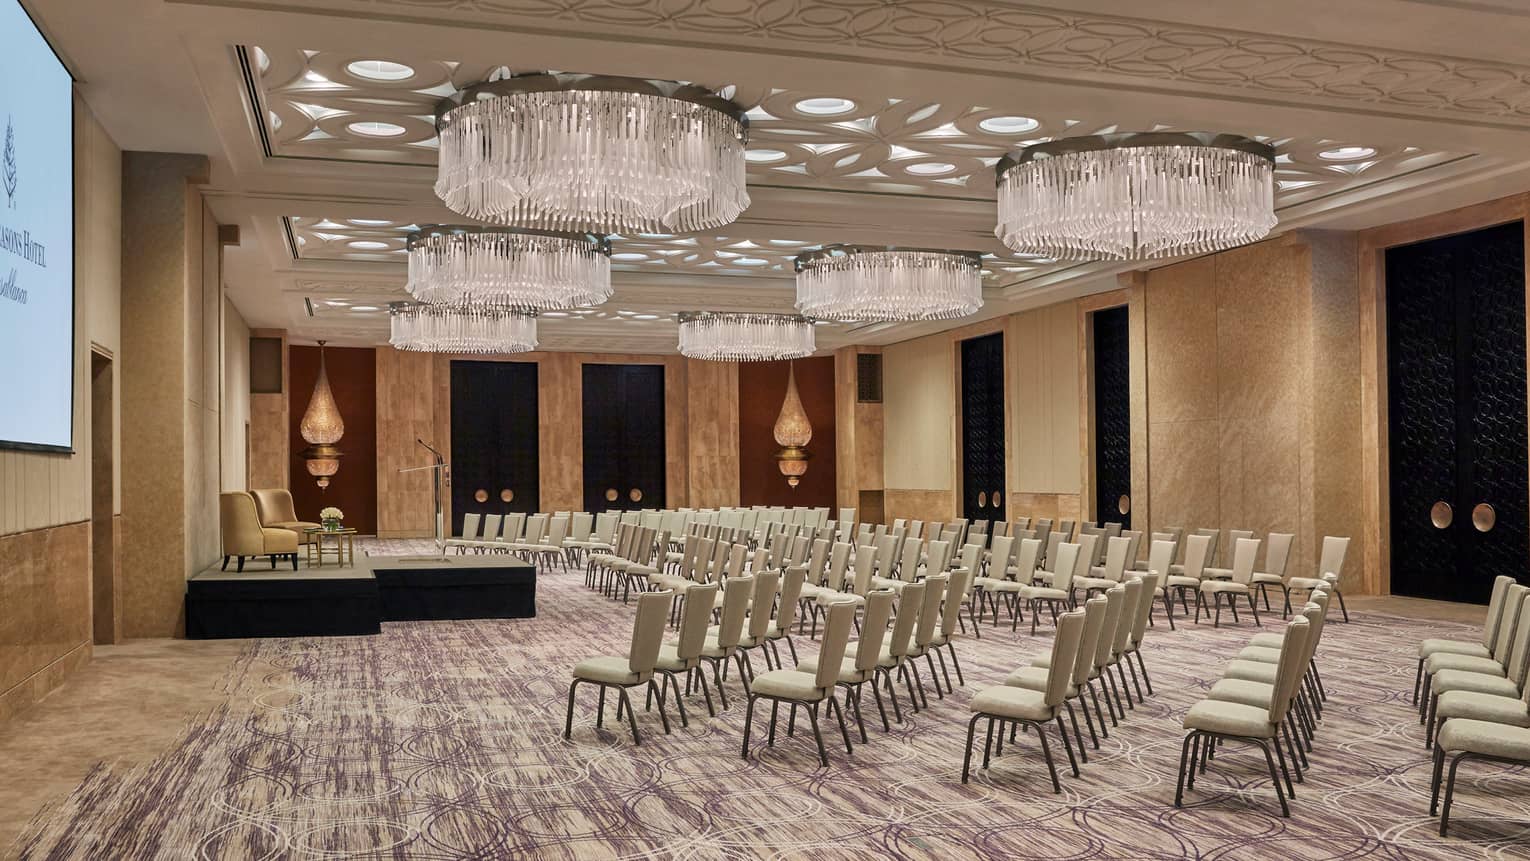 Rows of chairs face small stage in Atlantique ballroom with large chandeliers 